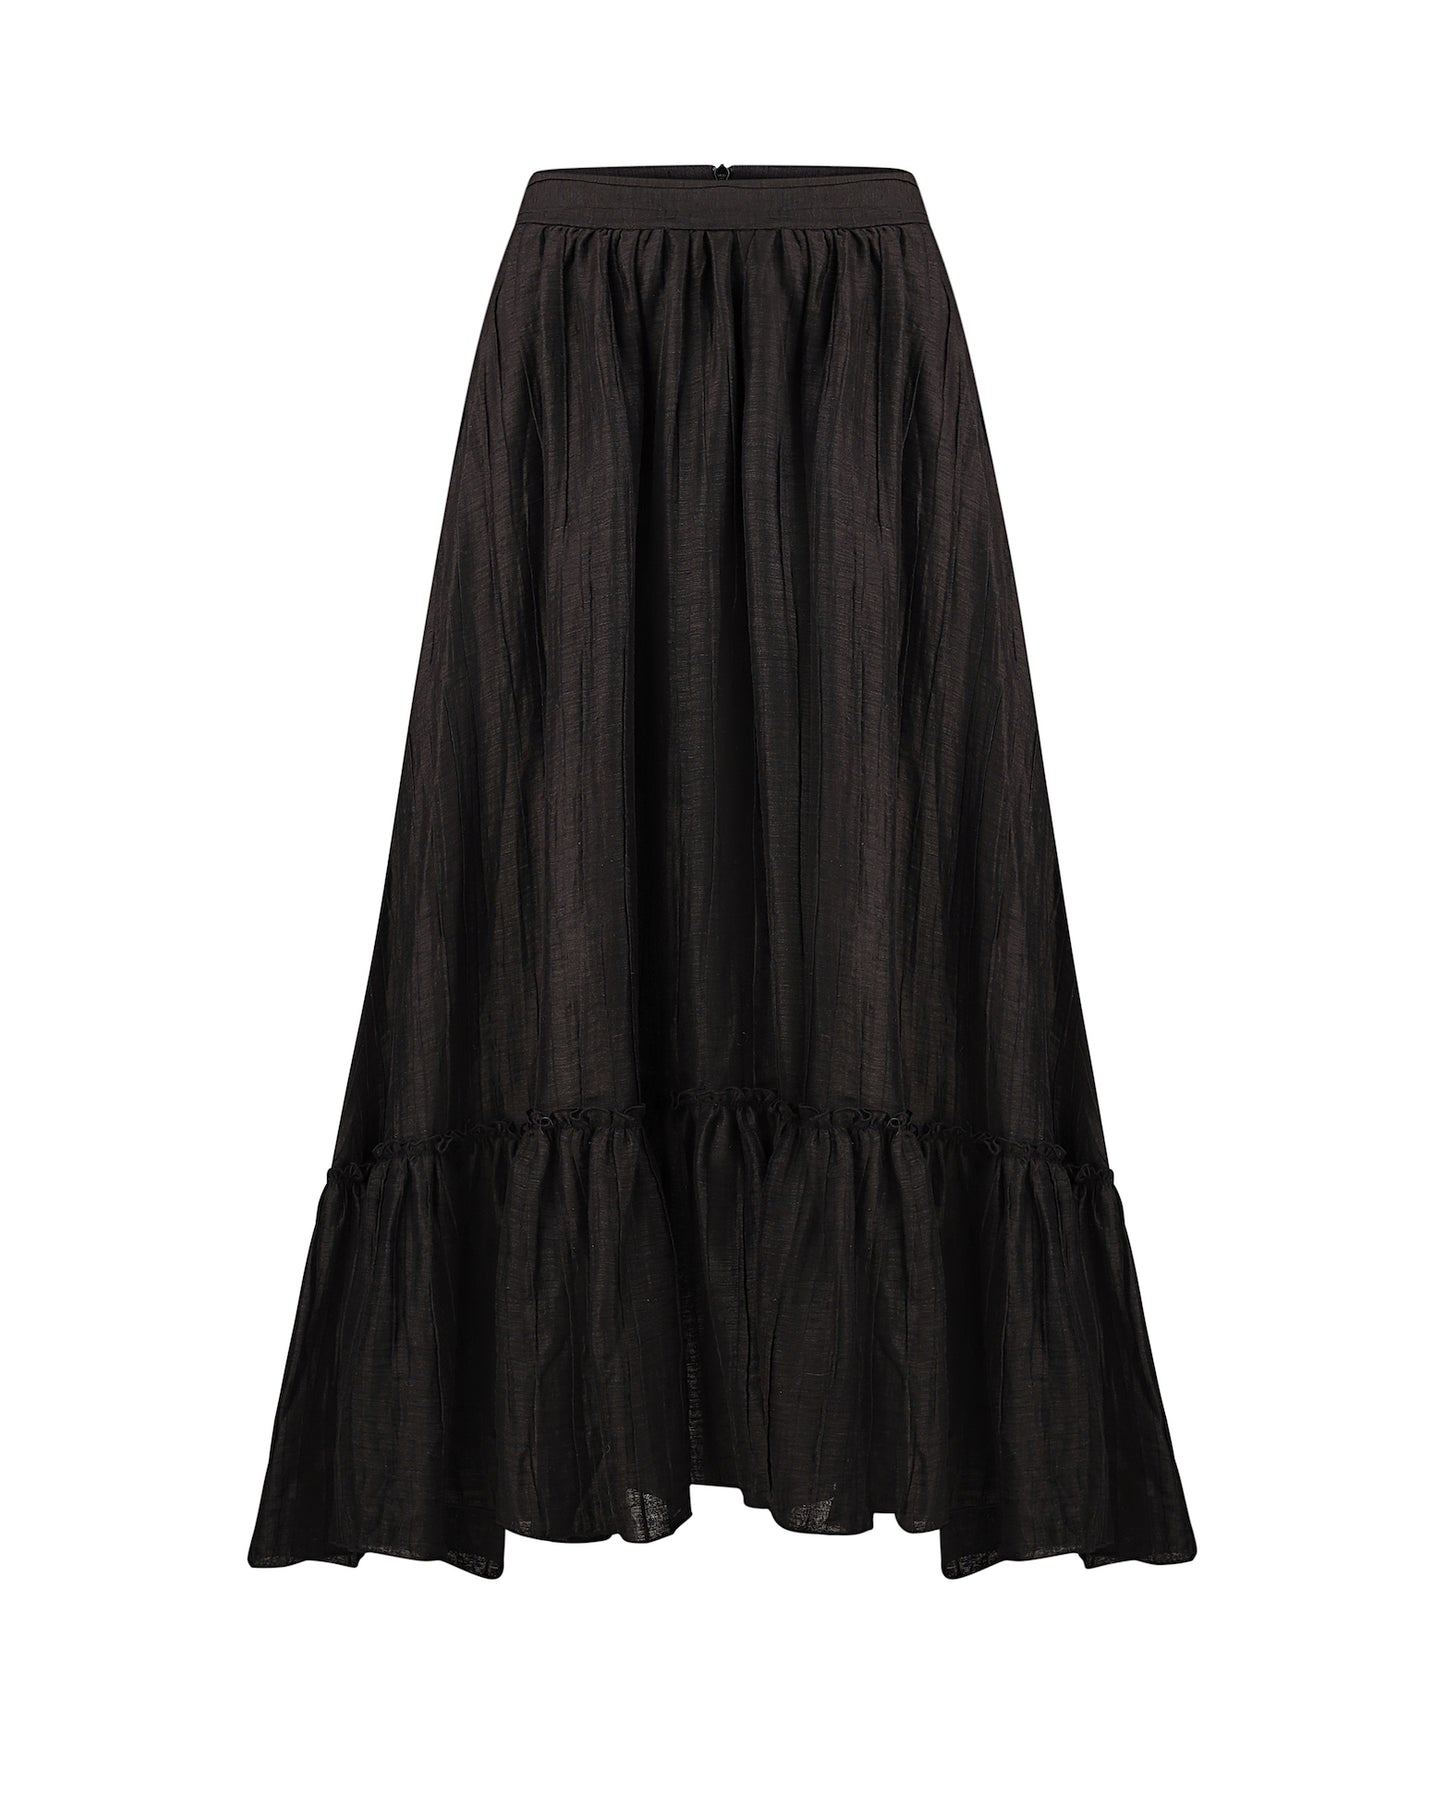 Maxi skirt with ruffle in black